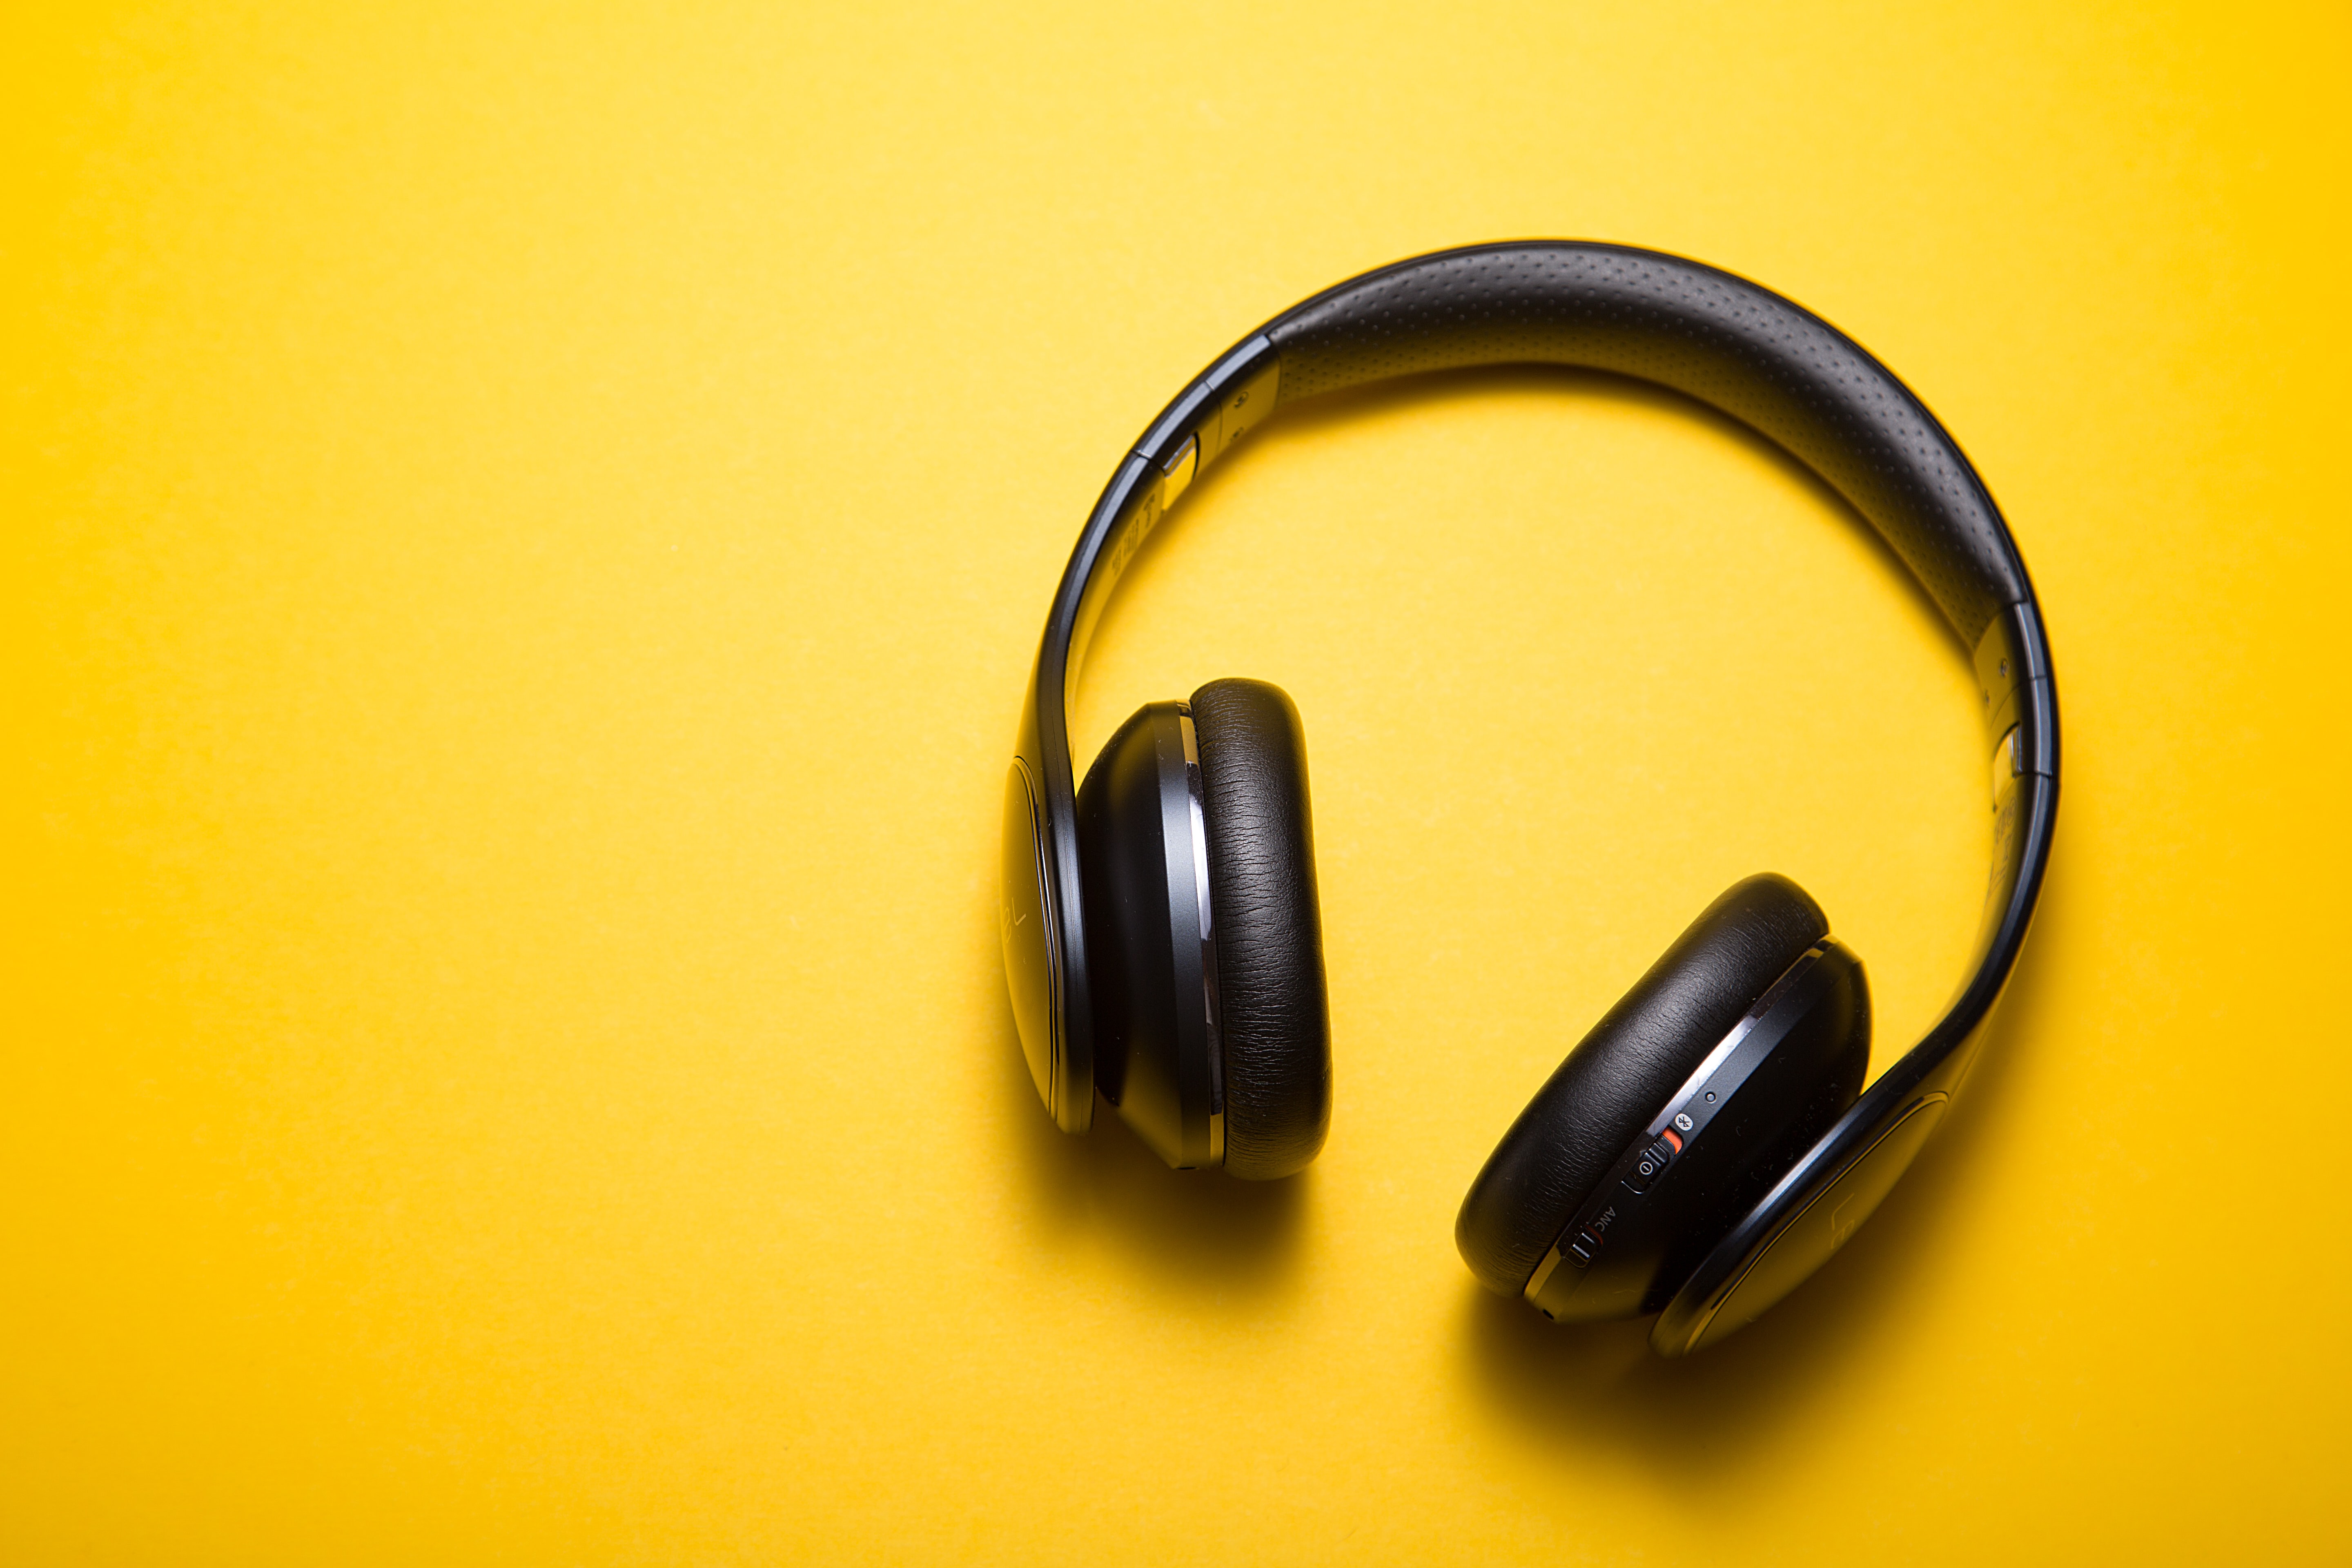 Positive Podcasts – The rise of “Happy News”